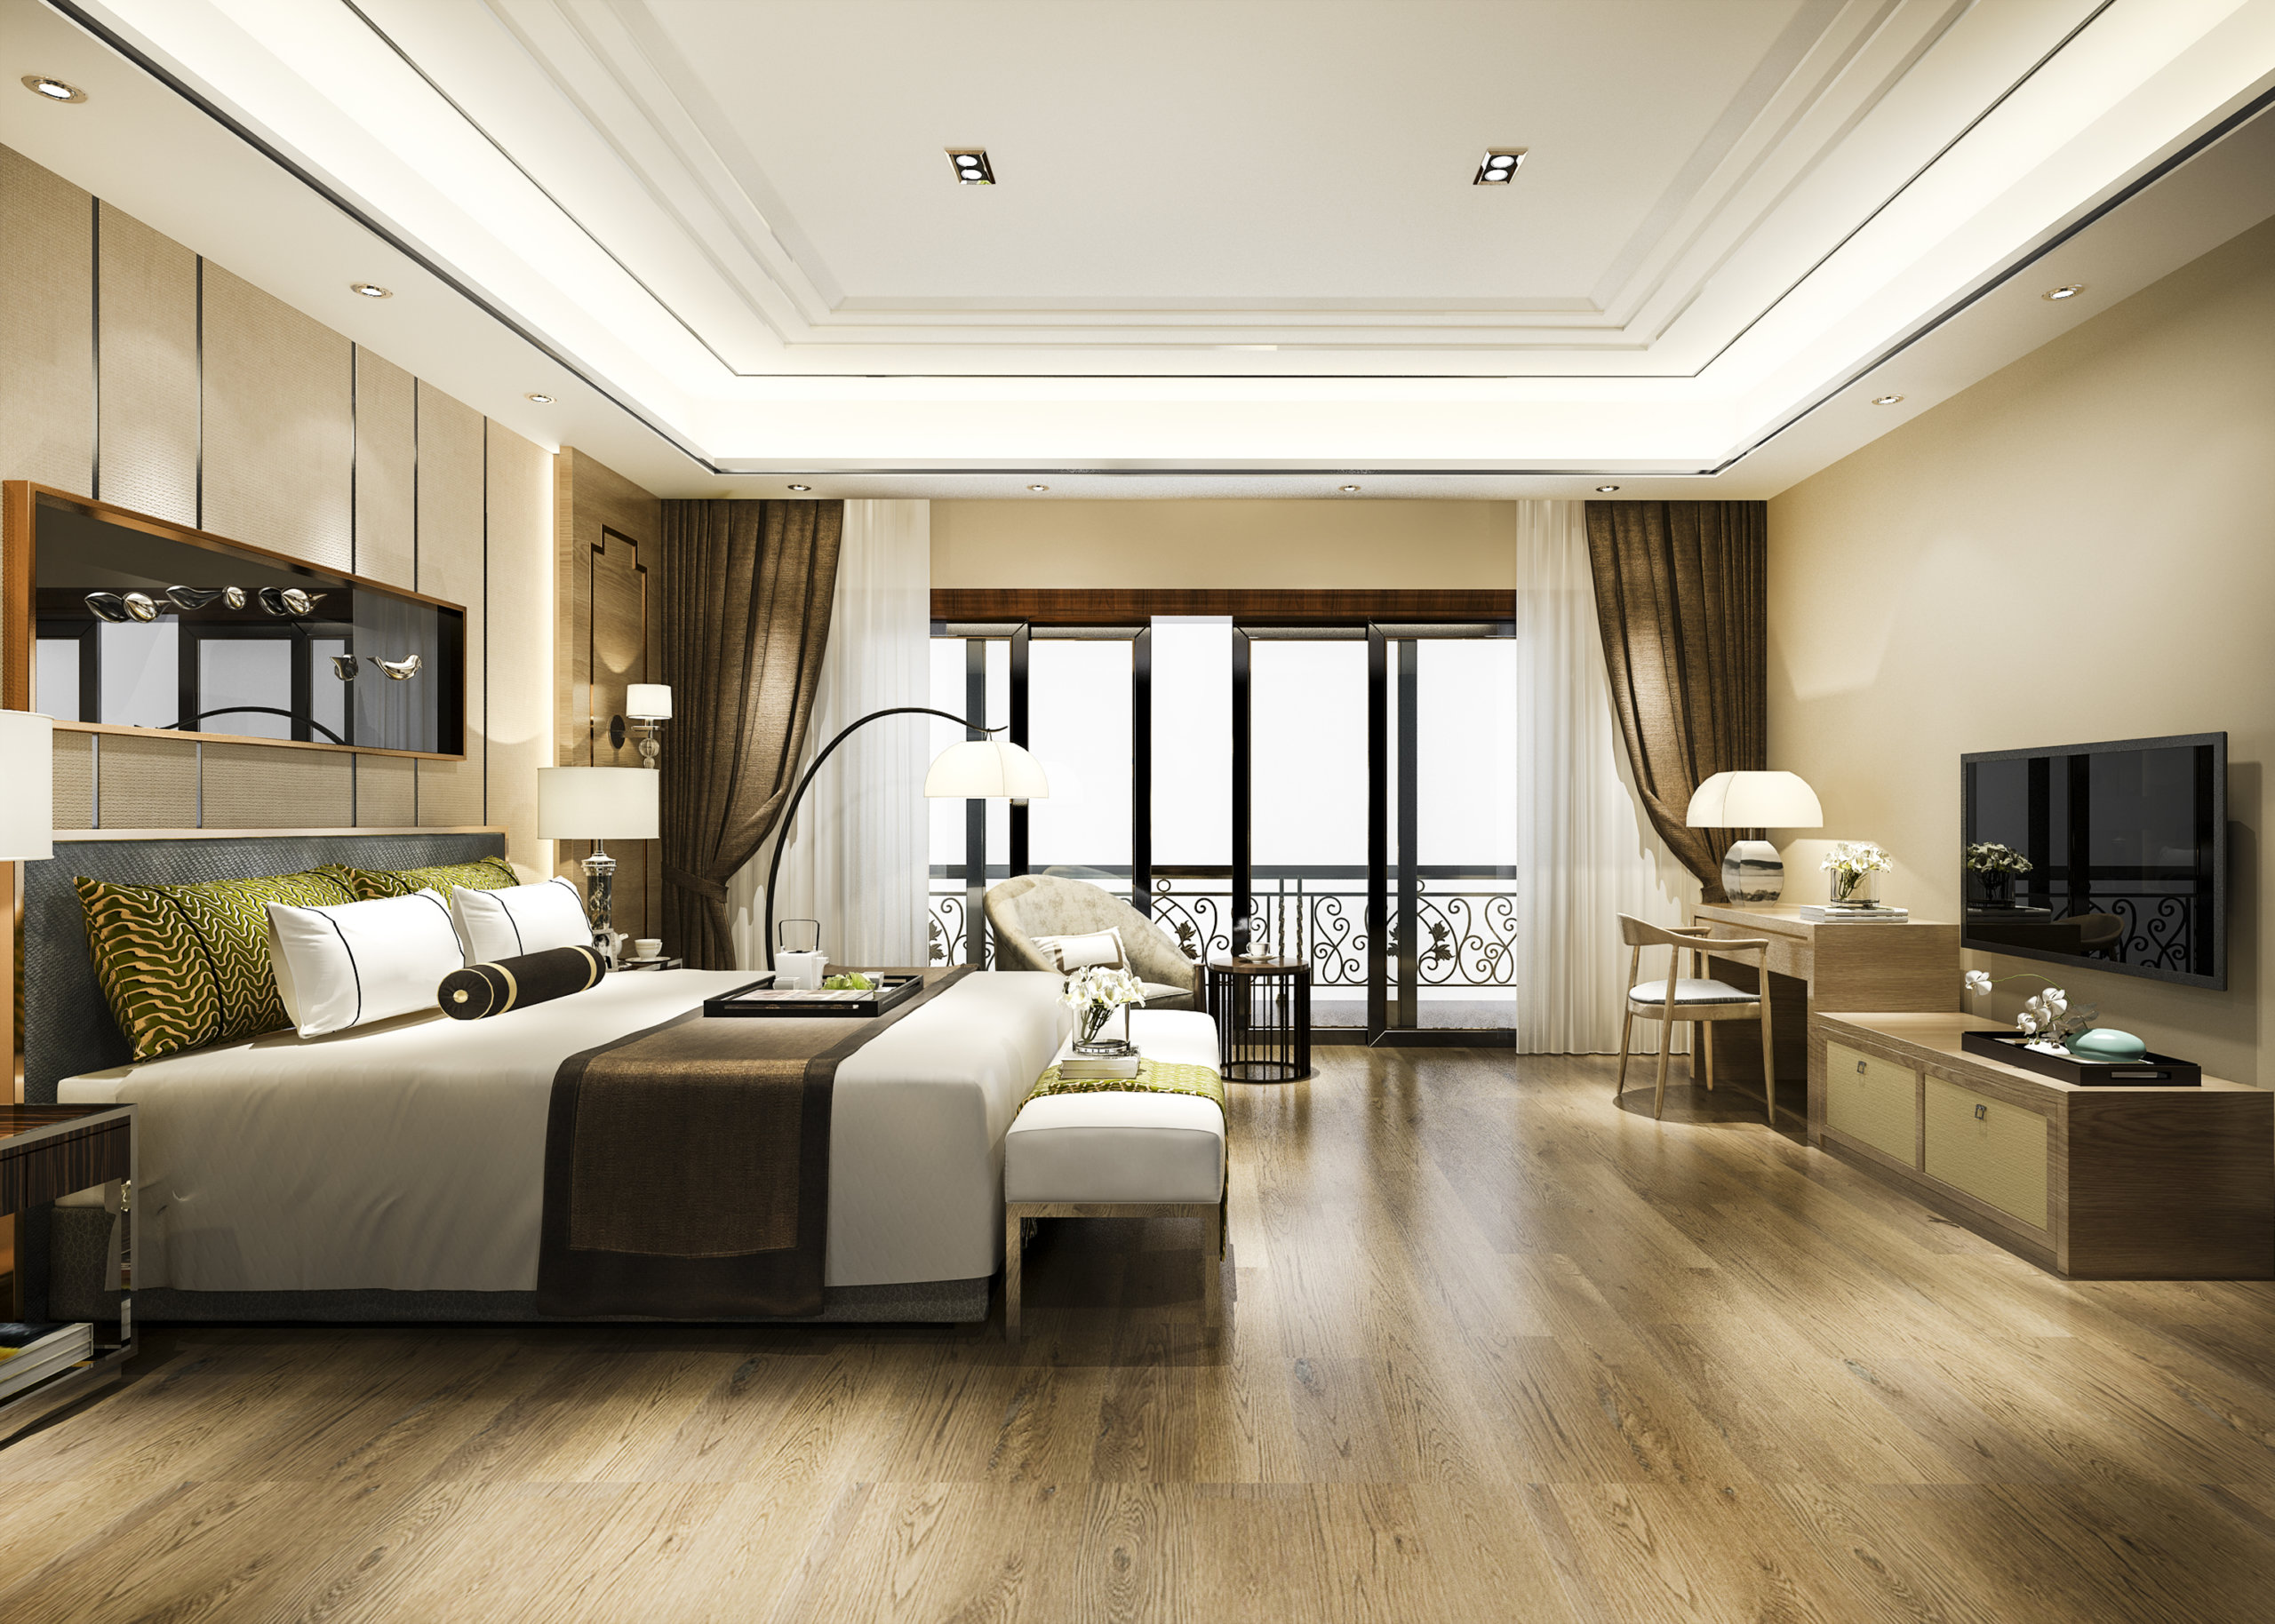 What are the 6 Key Elements to Designing a Bedroom